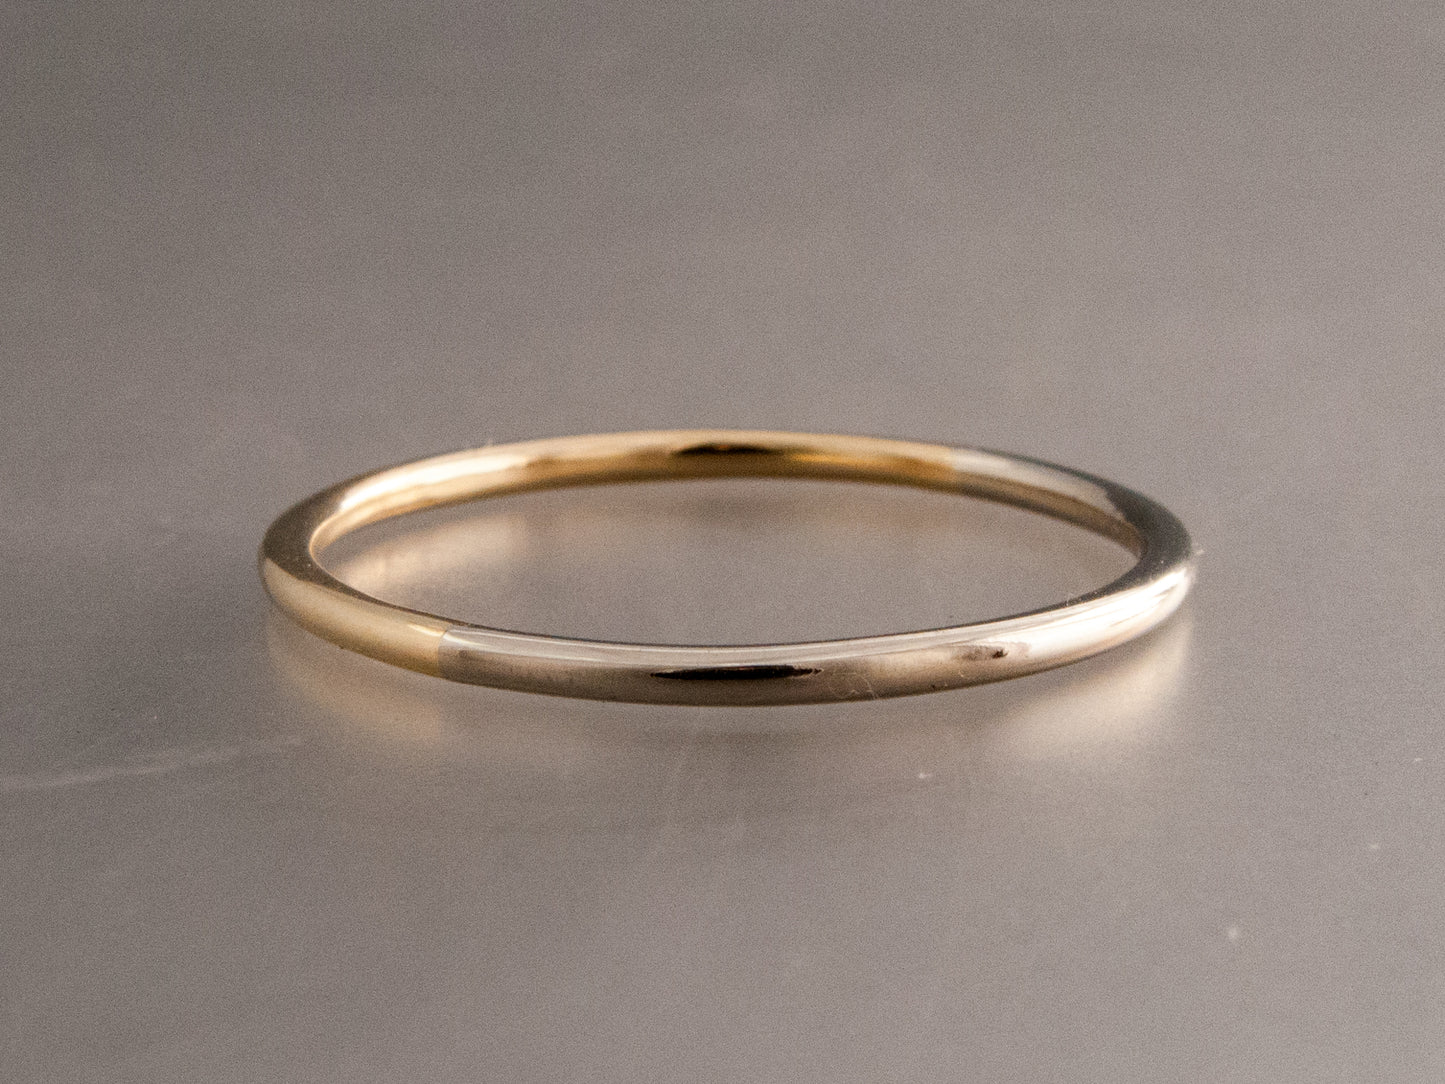 Two Tone Gold Round Women's Wedding Ring | 50/50 Partnership Band in Rose Yellow or White Gold